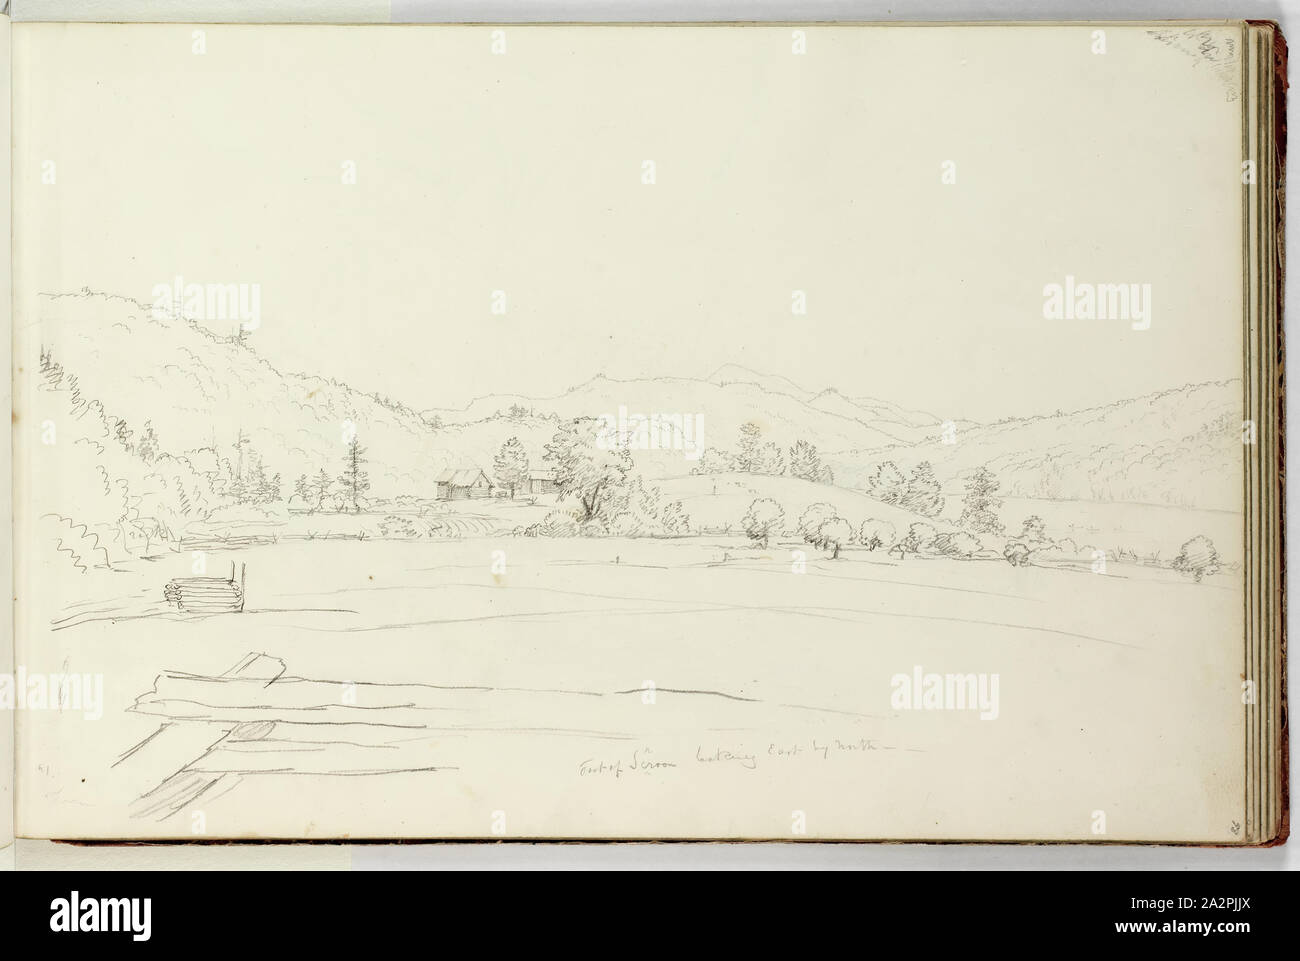 Thomas Cole, American, 1801-1848, Foot of Schroon Looking East by North, ca. 1835, graphite pencil on off-white wove paper, Sheet: 9 11/16 × 14 3/16 inches (24.6 × 36 cm Stock Photo